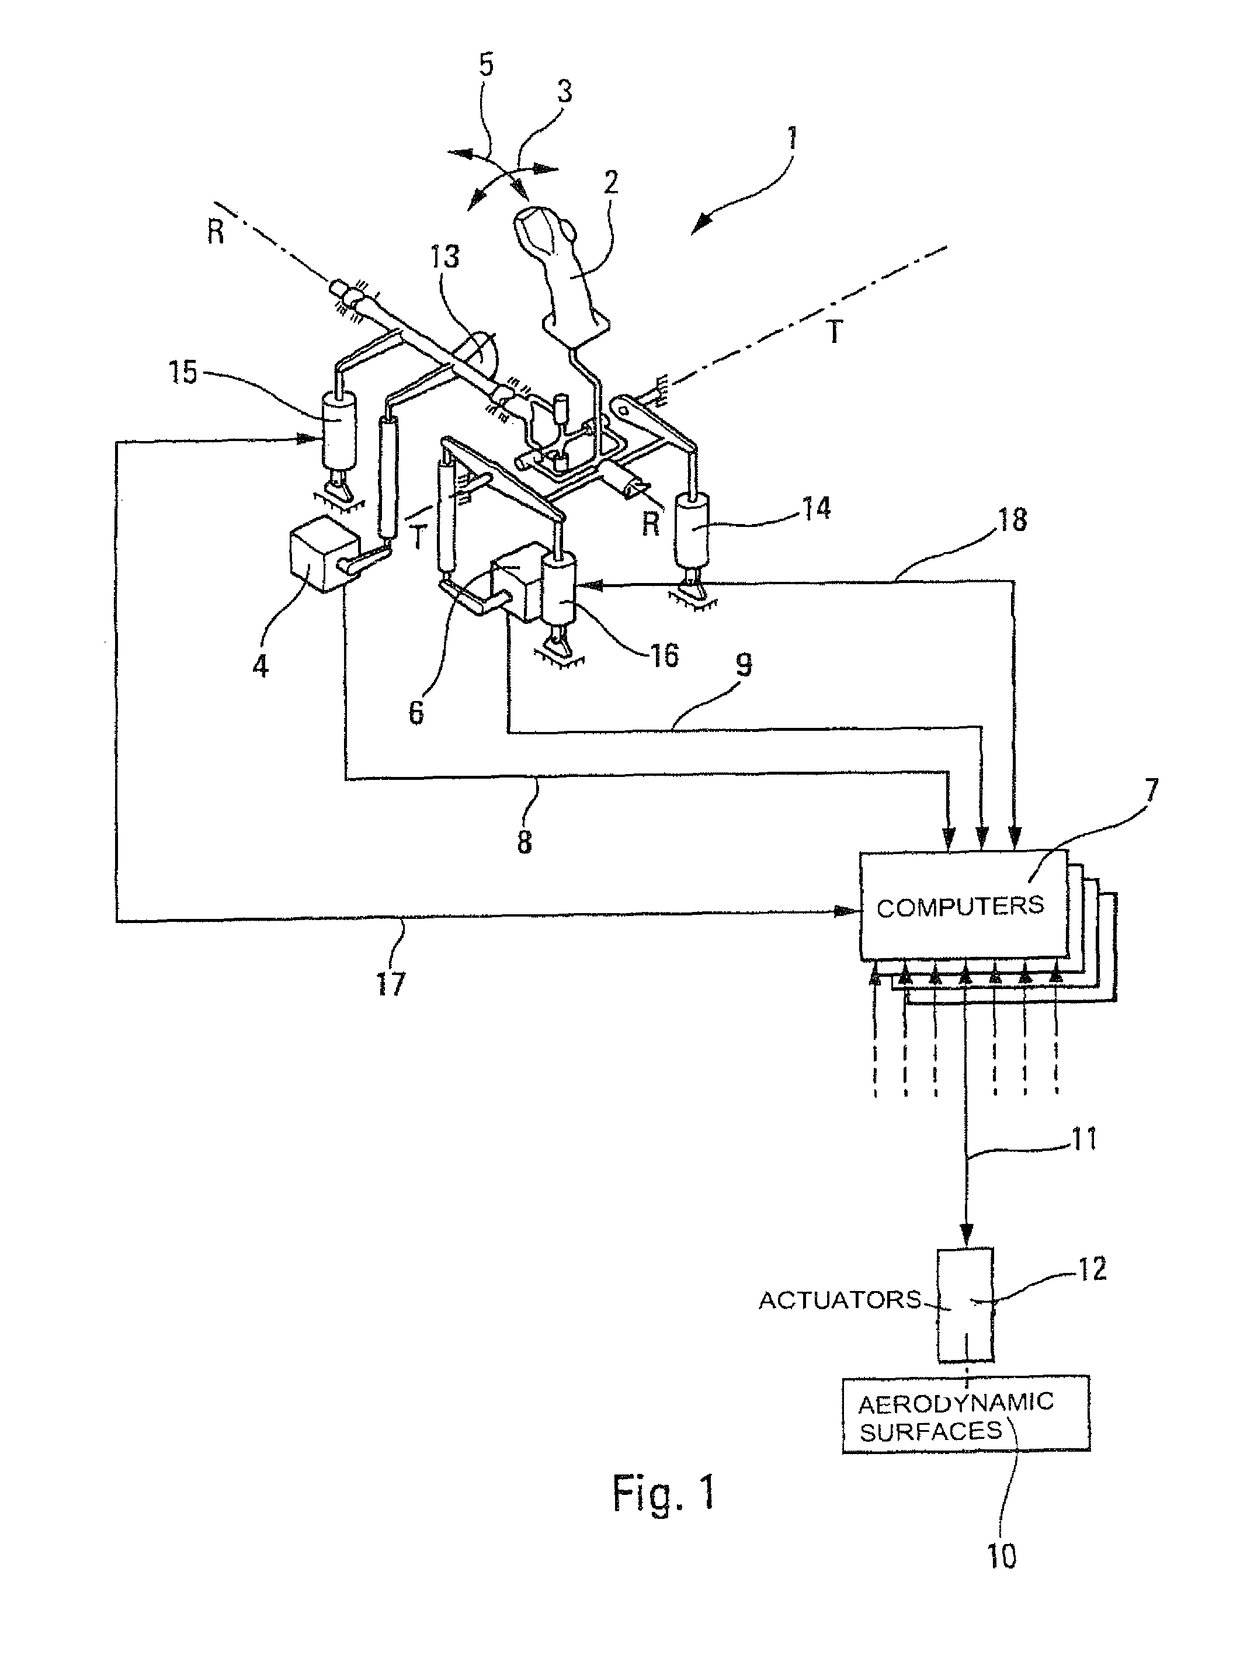 Fly-by-wire control system for an aircraft comprising detection of pilot induced oscillations and a control for such a system